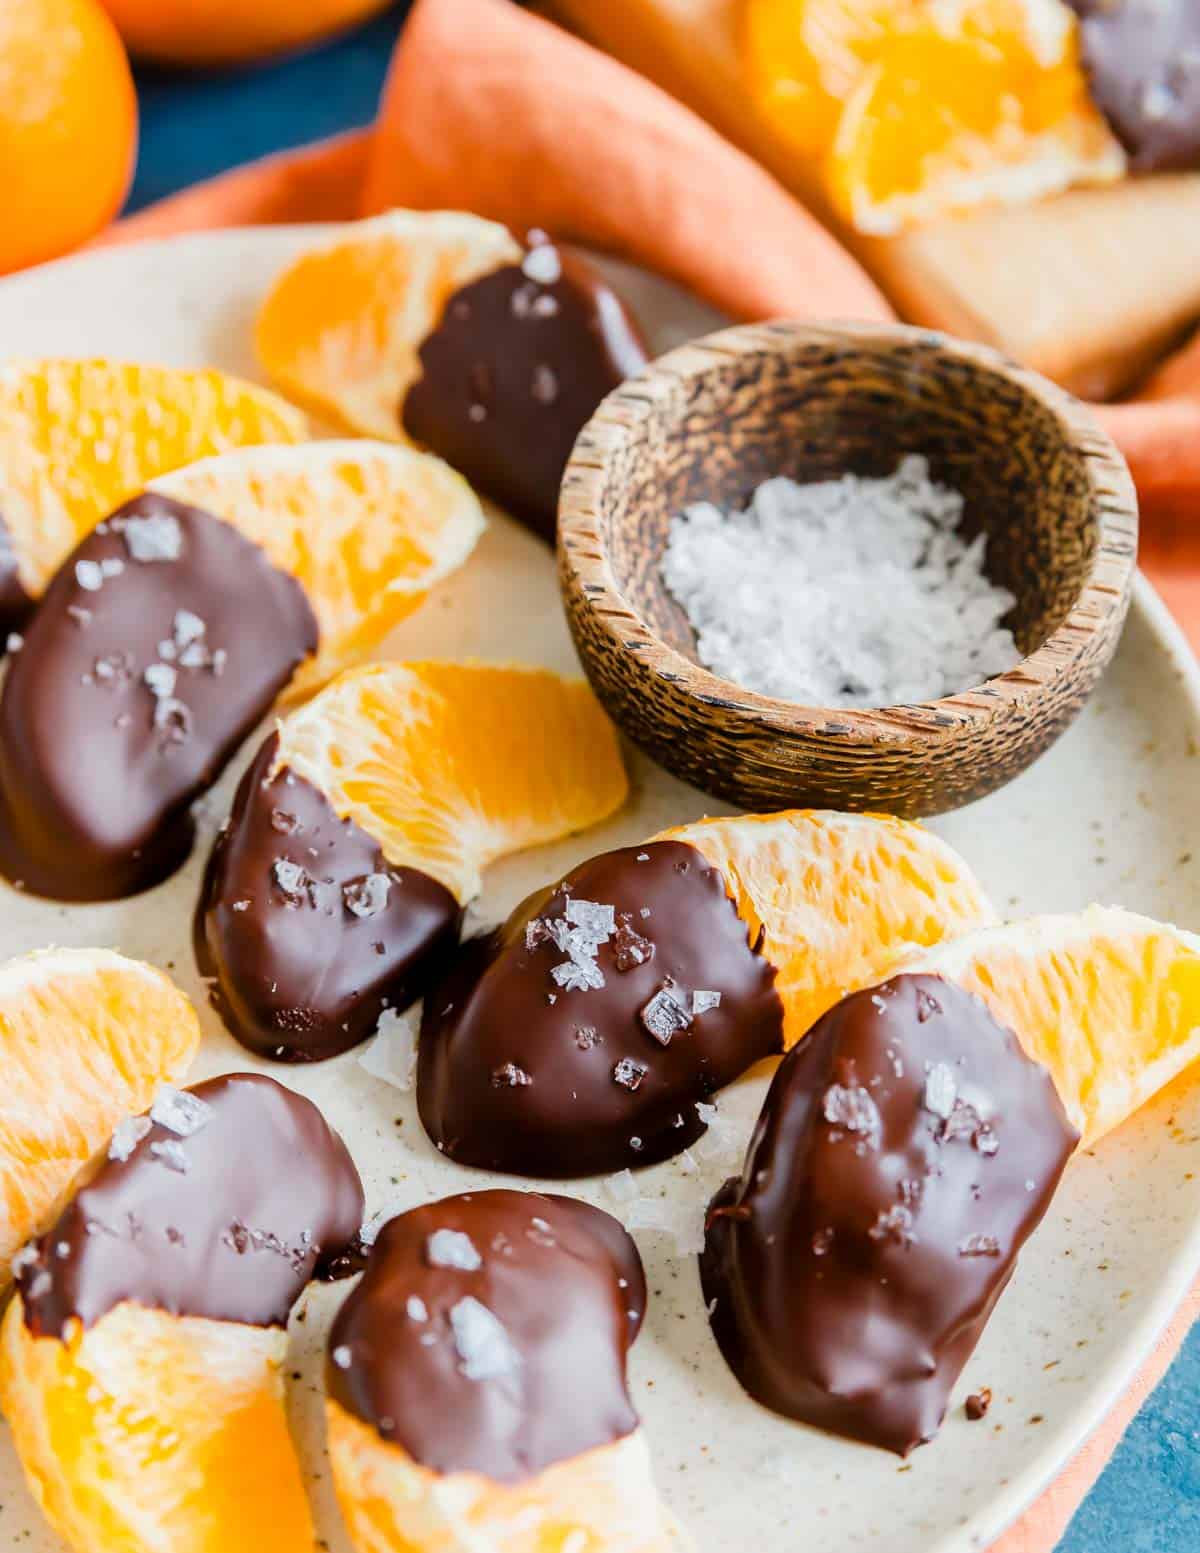 Orange segments half covered in chocolate with coarse salt on a plate.